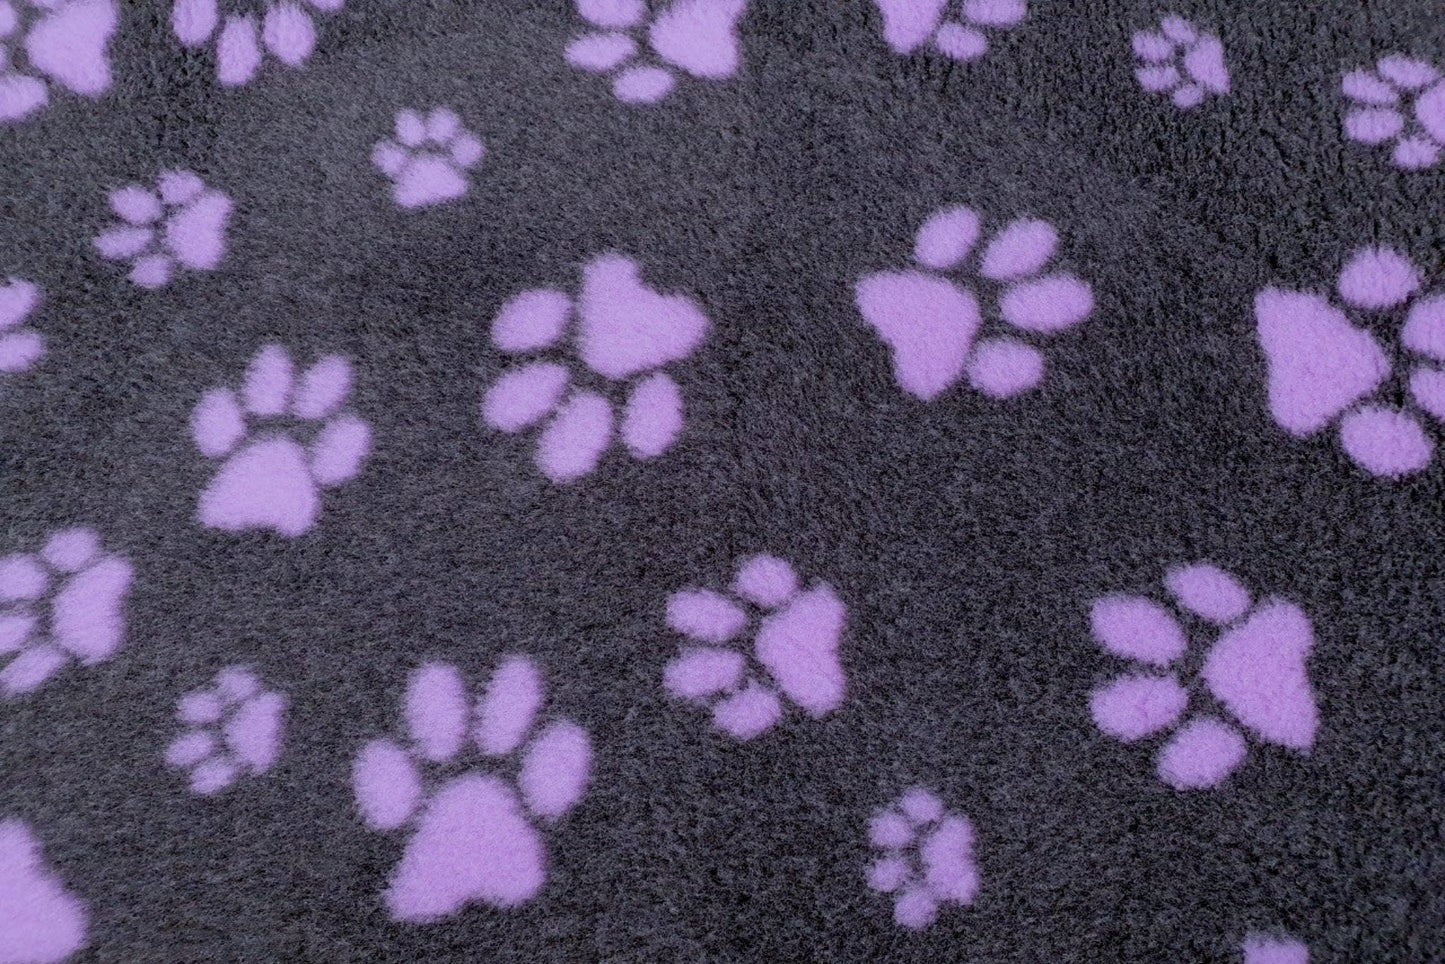 Vet Bed - Rubber Backed - Charcoal with Purple Designer Paws